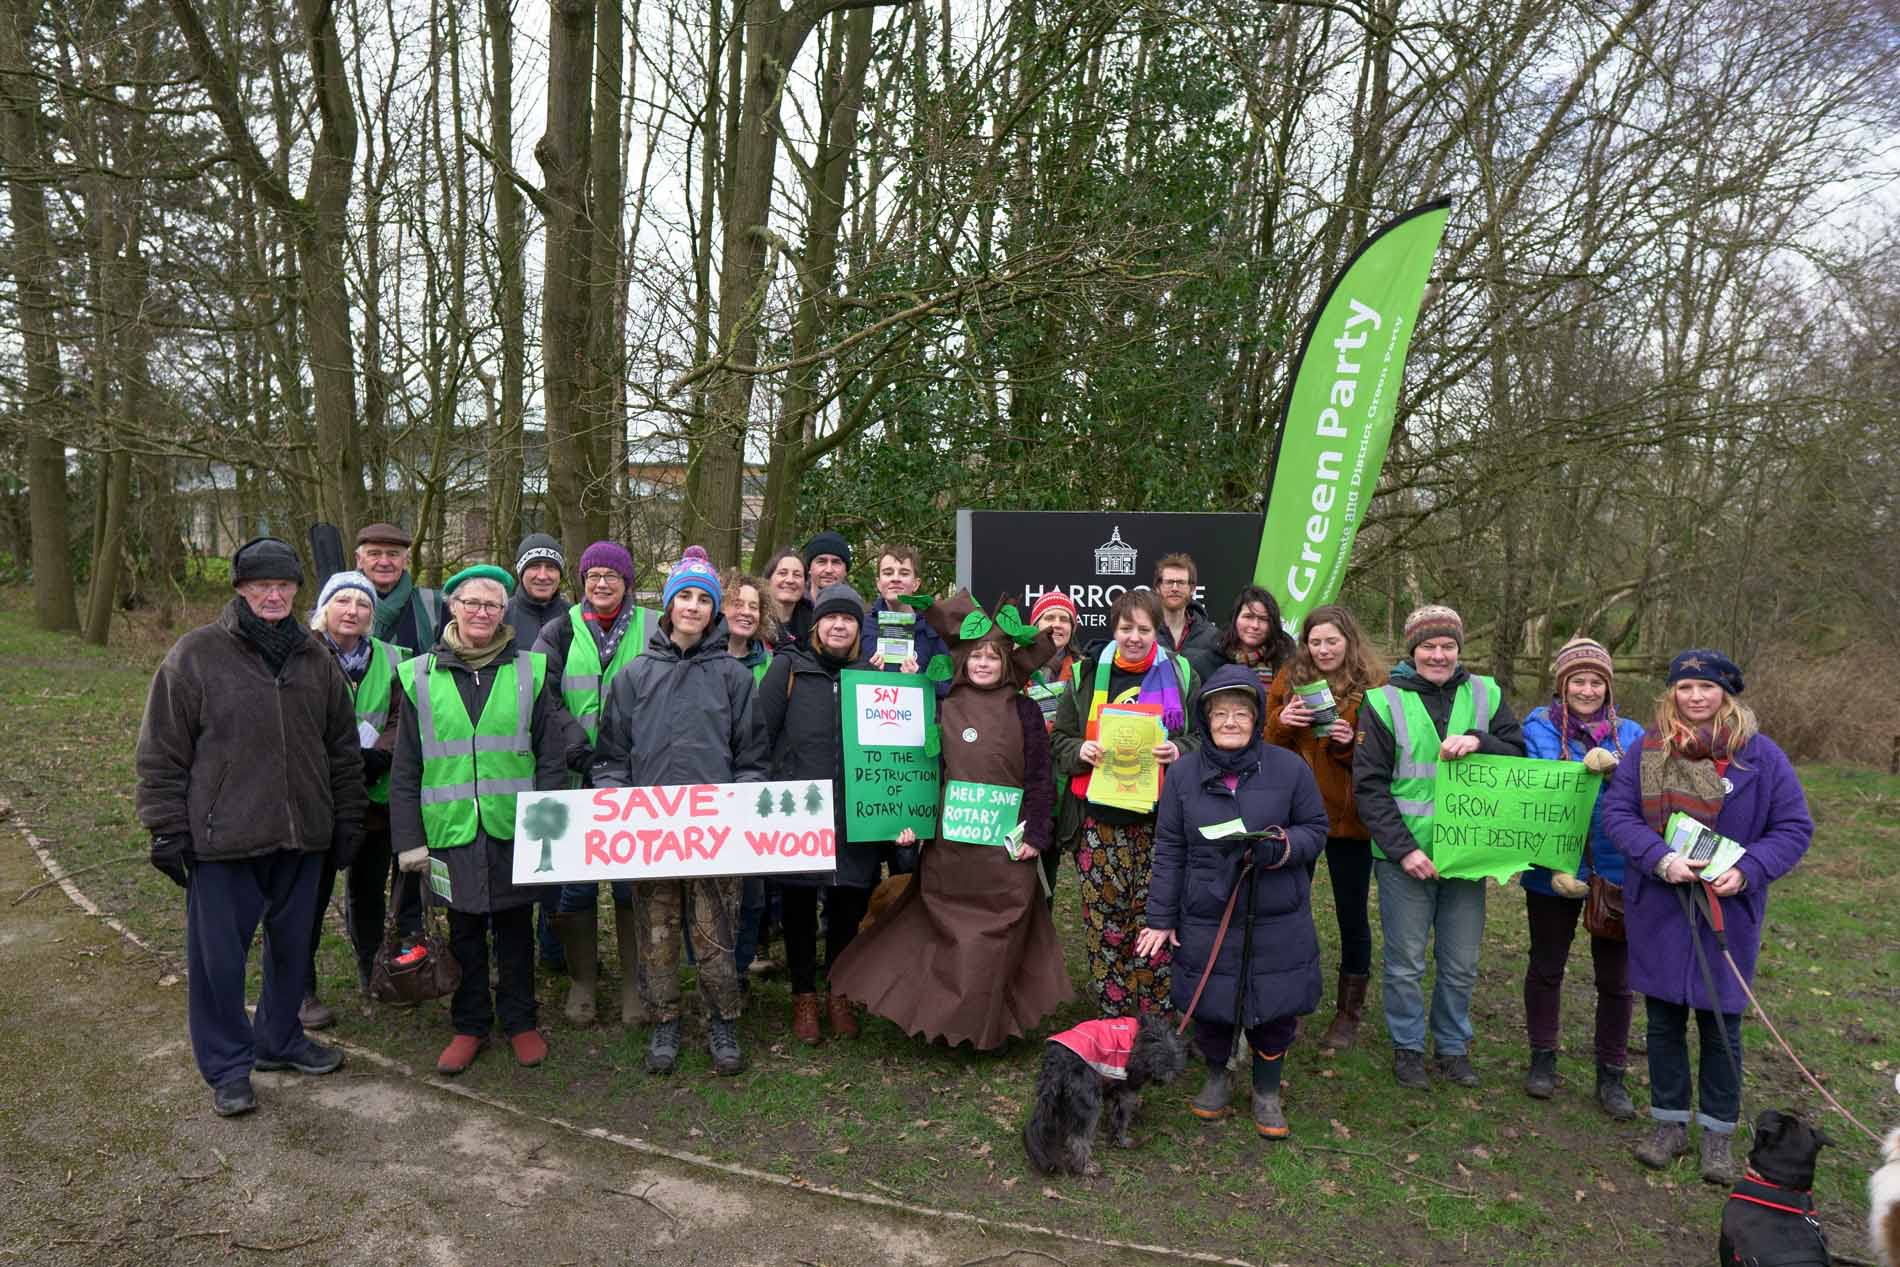 Harrogate Green Party rotary woods